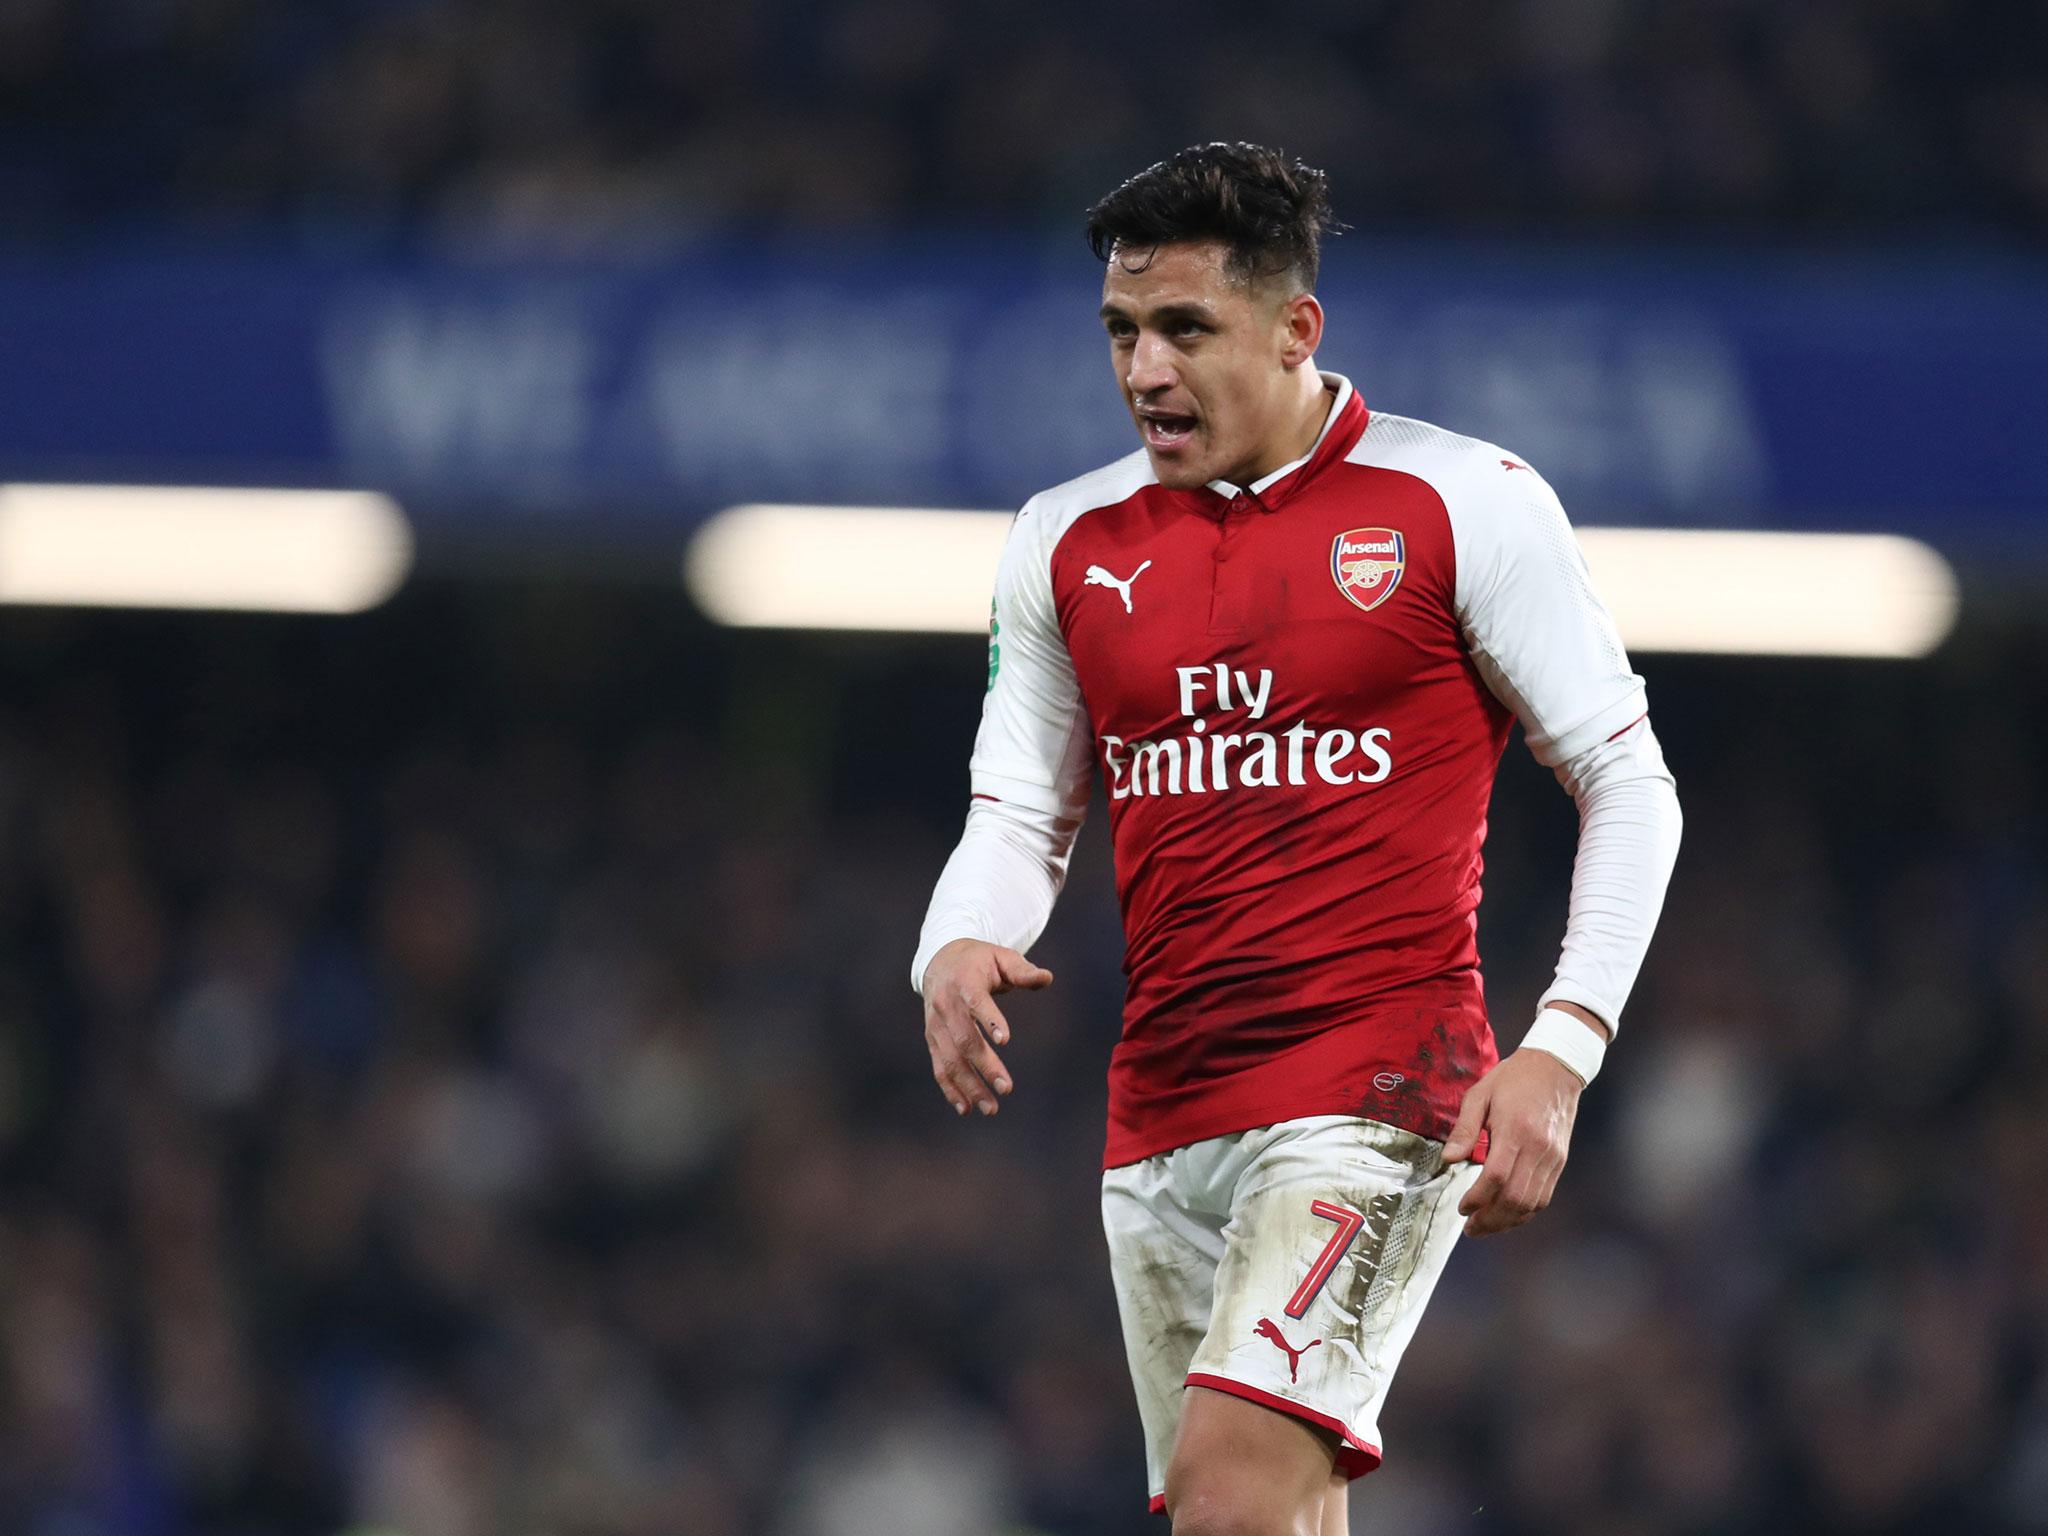 Manchester United 'considerable favourites' to sign Alexis Sanchez with Arsenal forward now 'on standby'